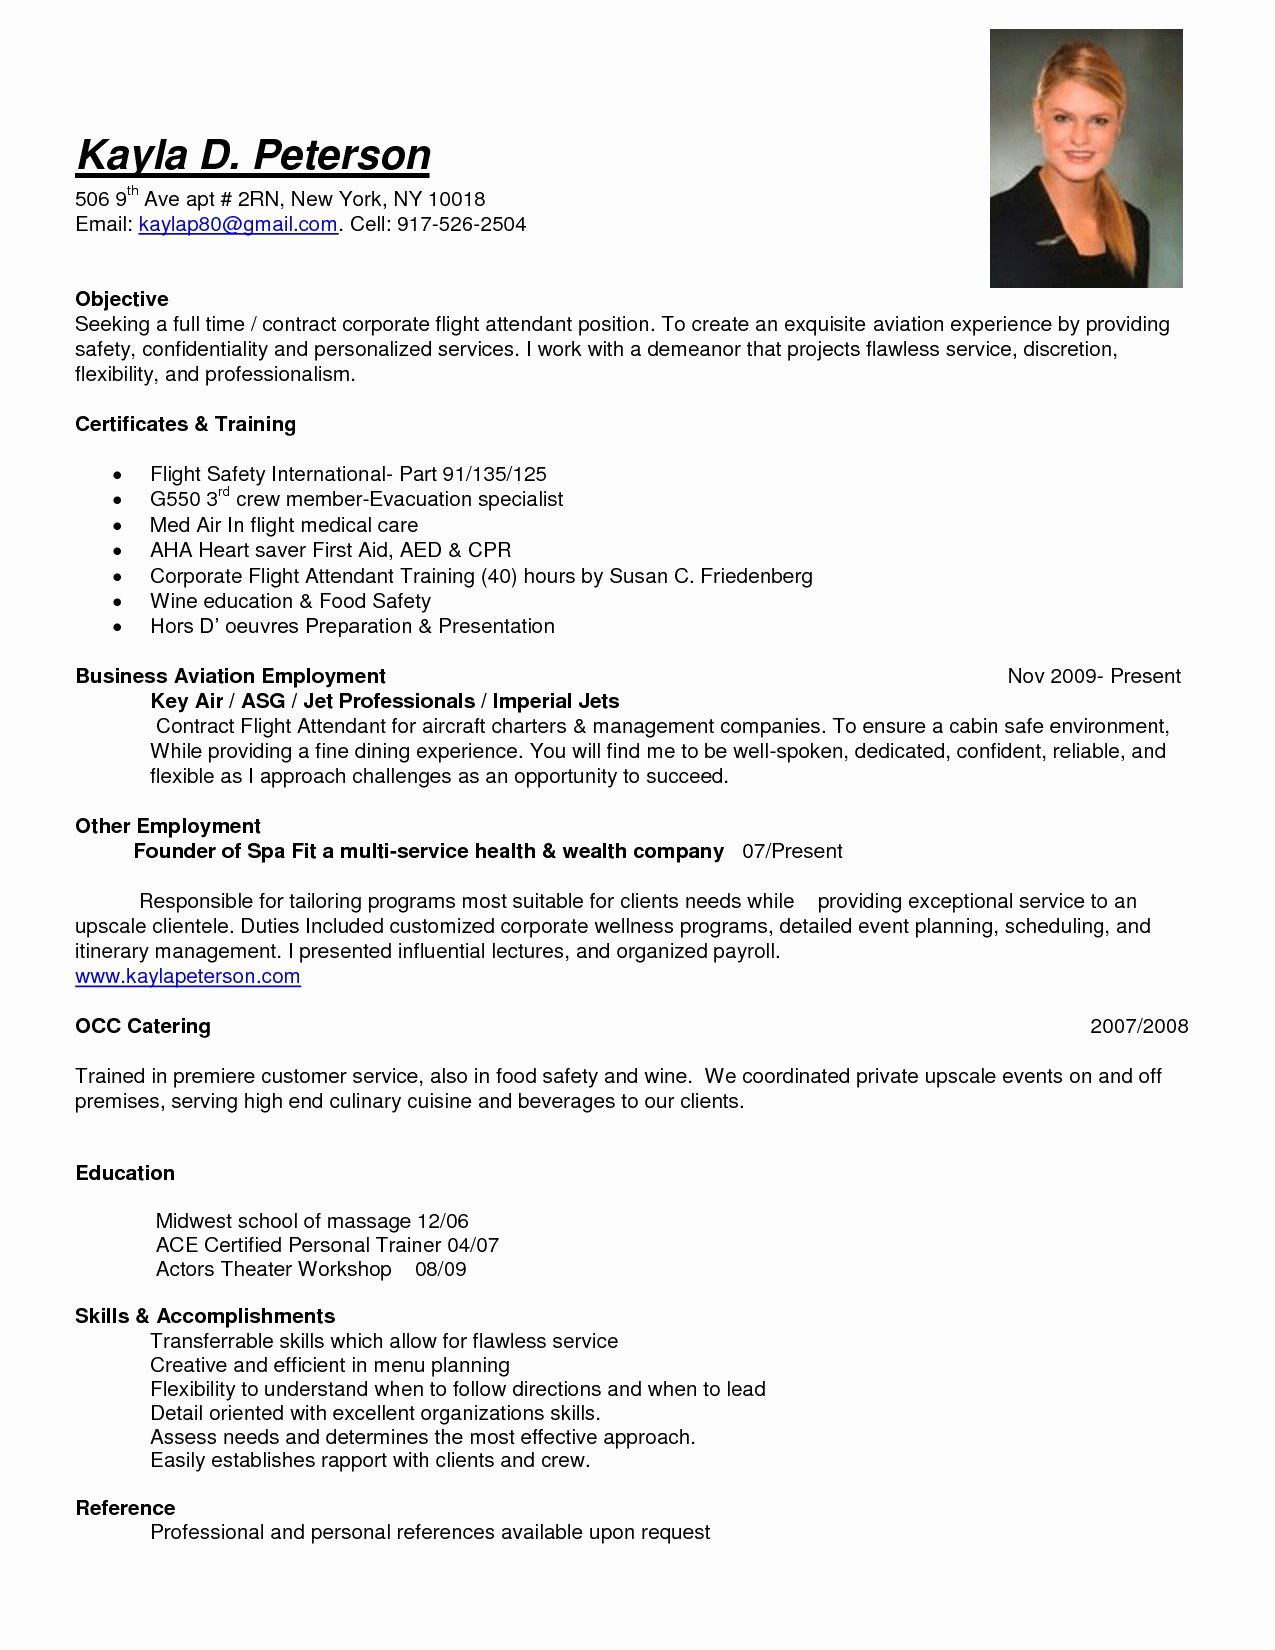 Stunning Resume for Flight attendant with No Experience